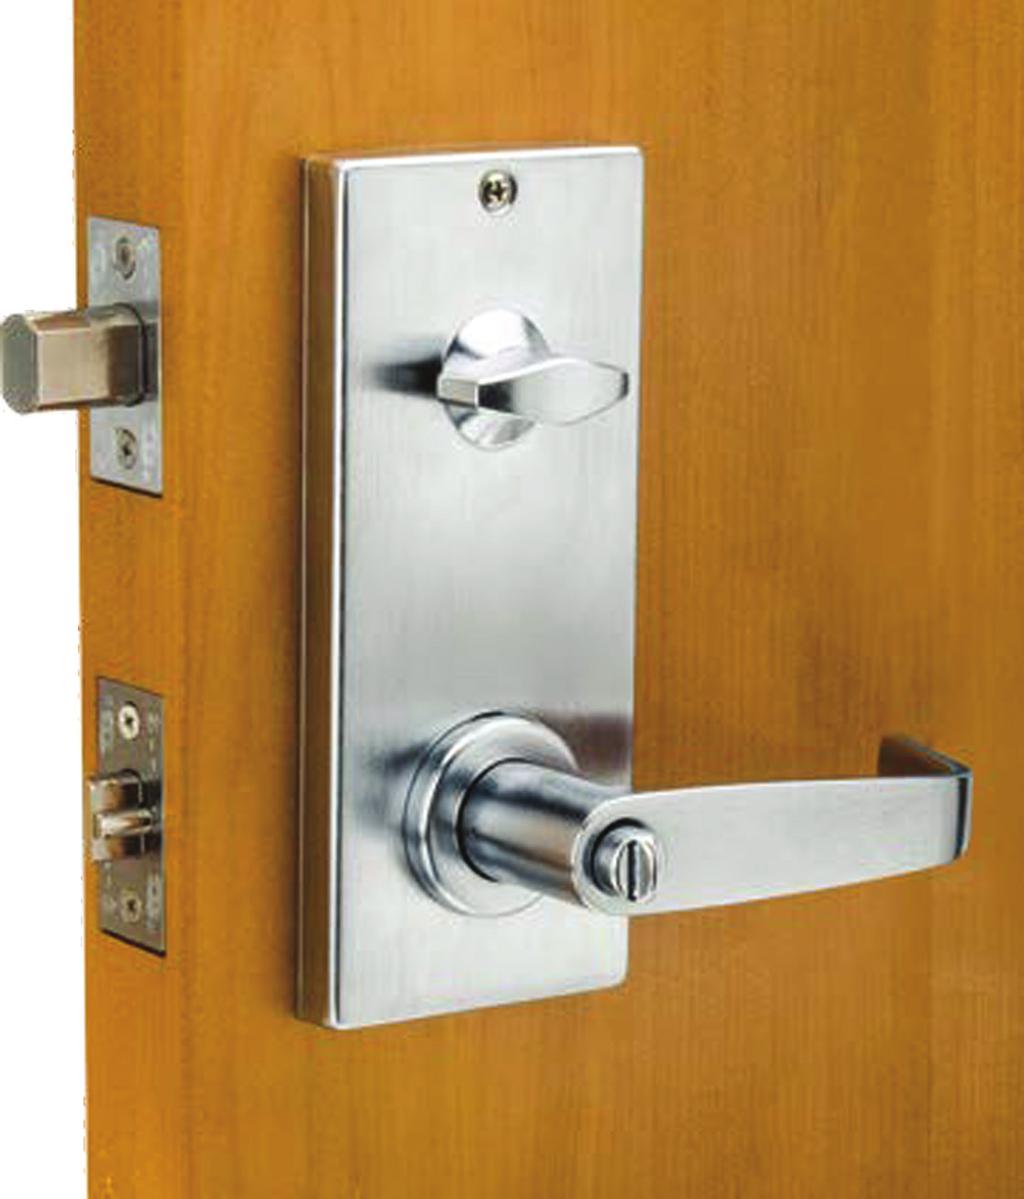 Interconnected Lock ANSI Grade 2 Medium Duty GF2 Series Features The GF2 Series interconnected locks bring together the functionality of the cylindrical locks with the security of the auxiliary